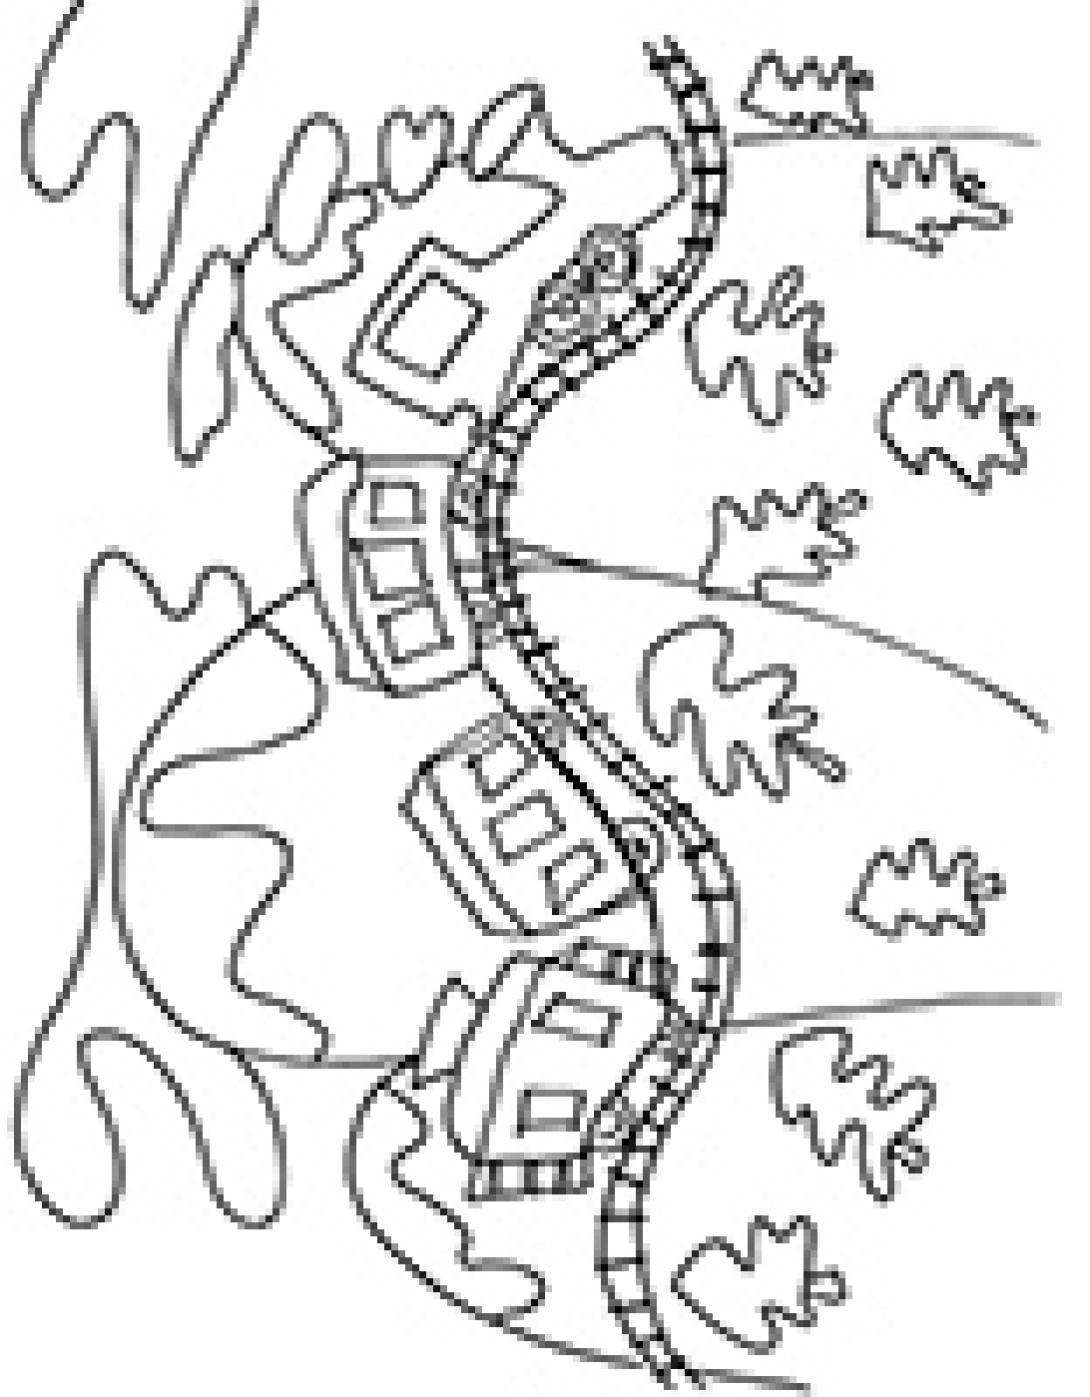 On the train coloring page